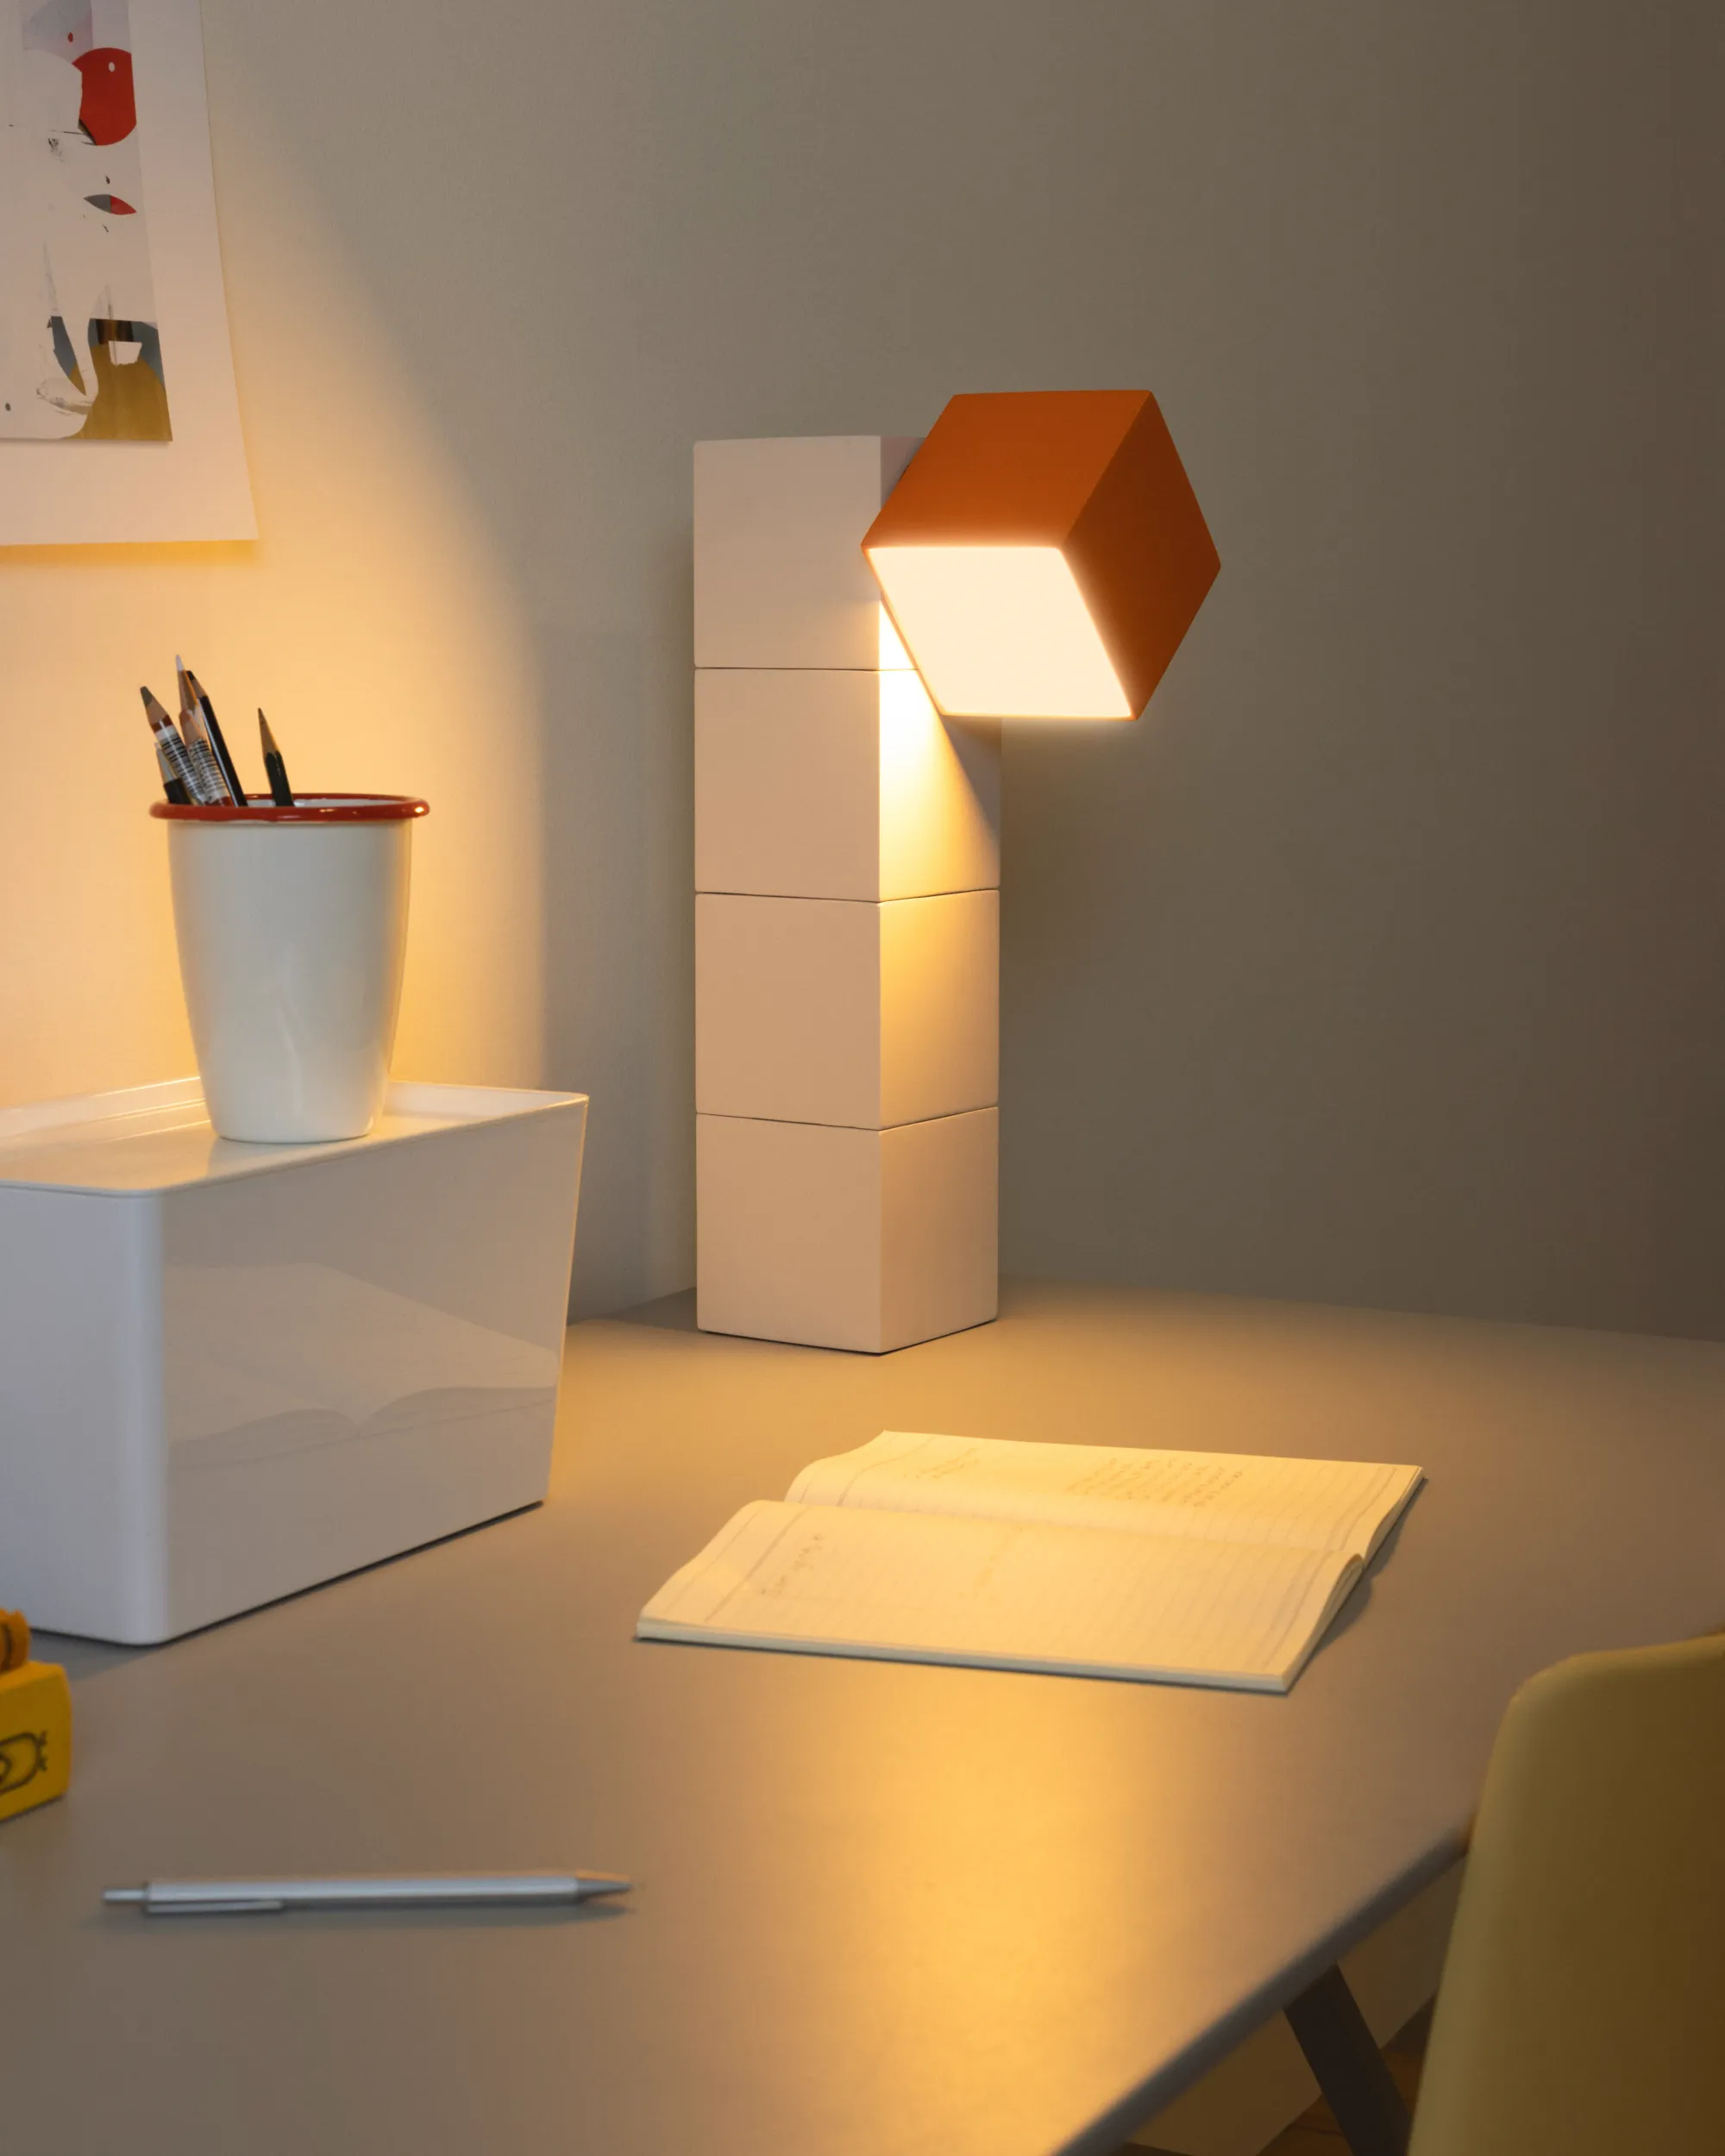 An Analog Task Light by Gantri gives light to a small home office space.